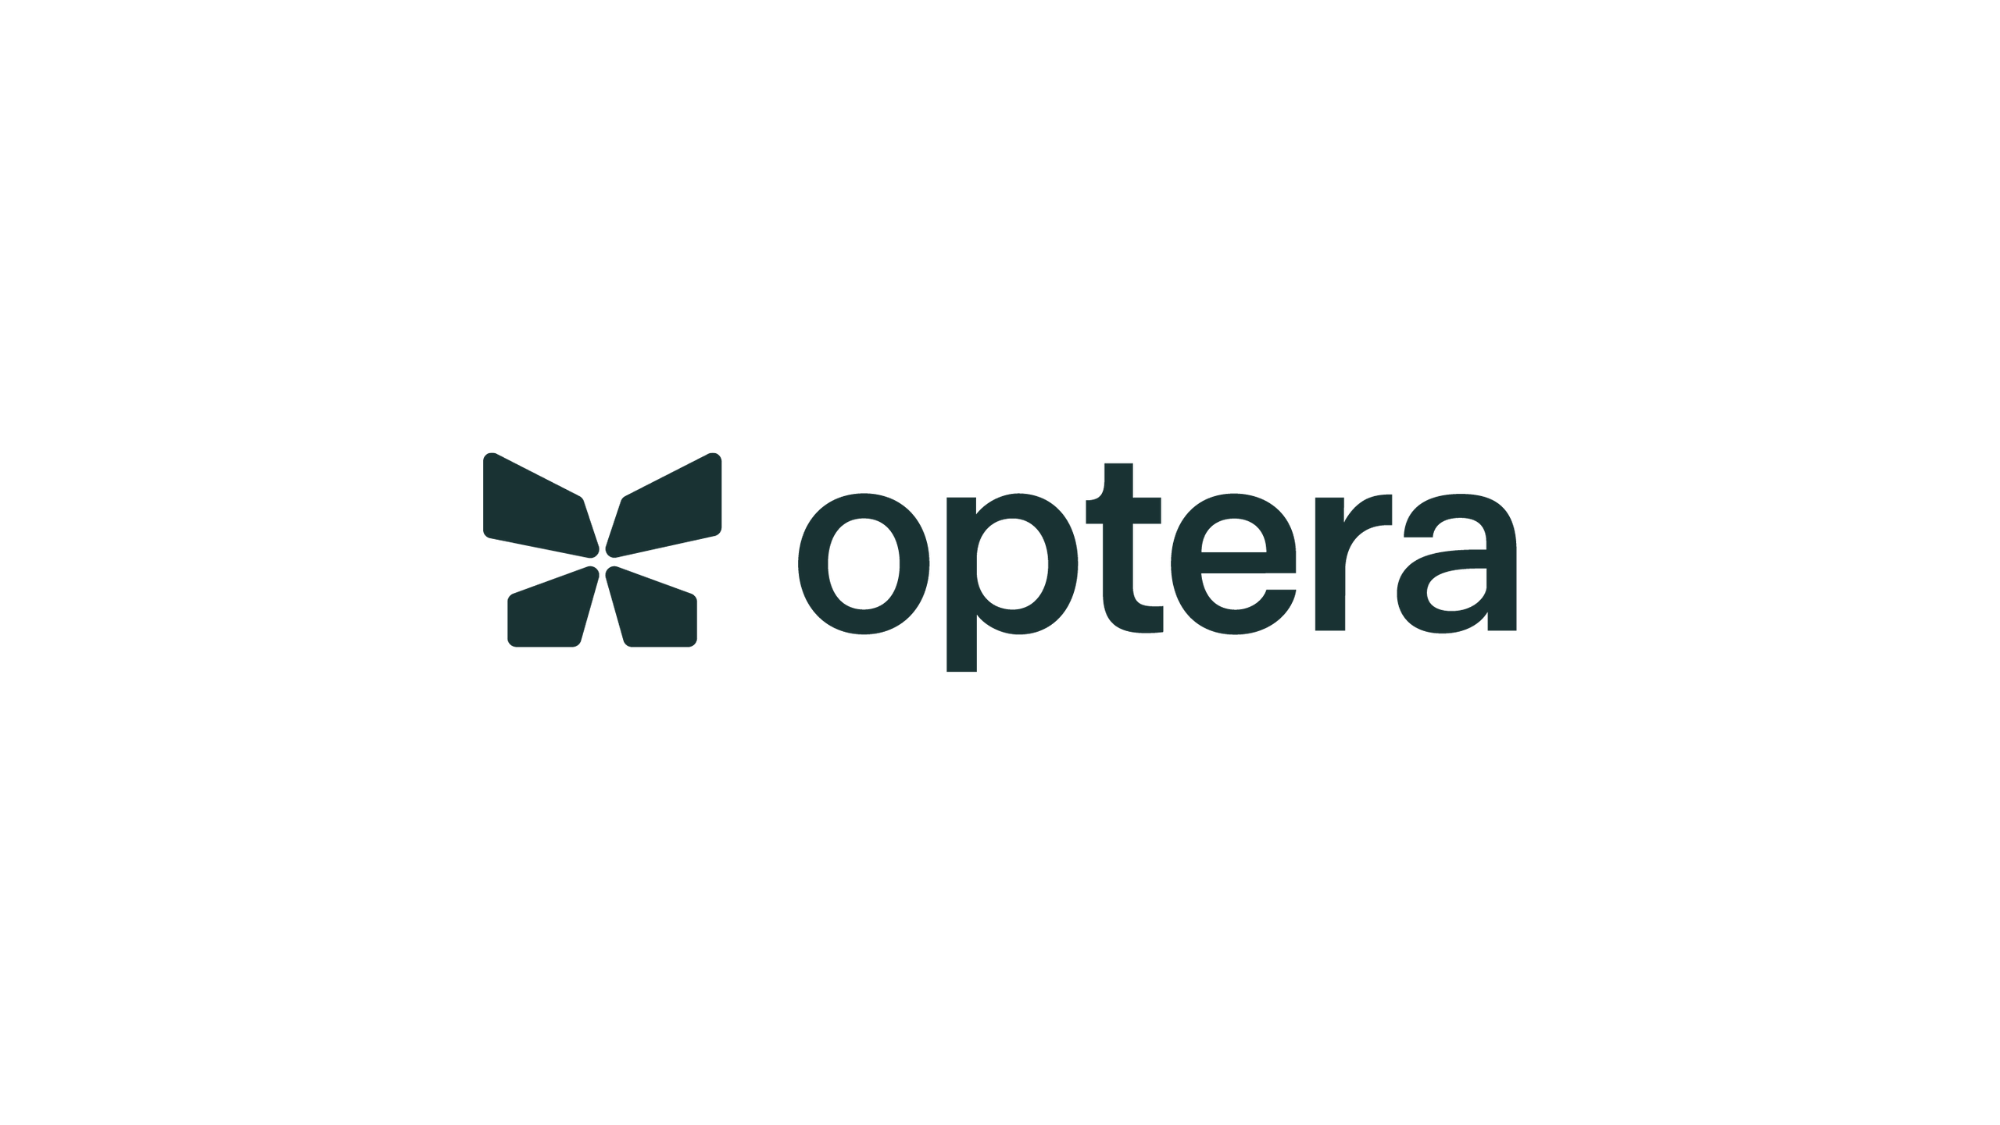 Logo features a simplified butterfly silhouette in dark green, followed by the word Optera in all lowercase